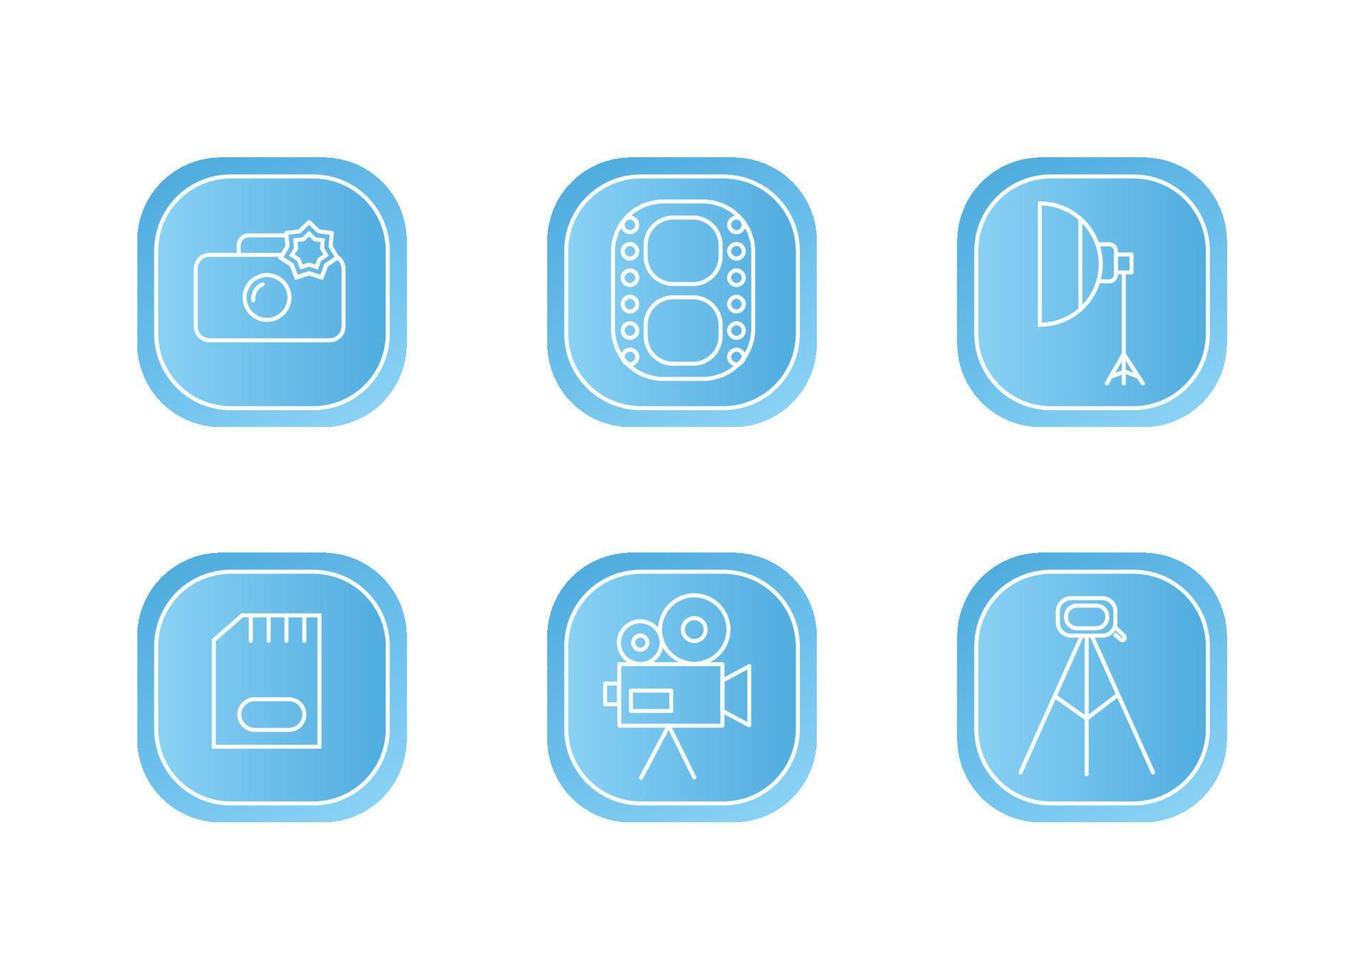 Photographer icon set on a blue background. Photographer equipment icons. Camera, film, softbox, memory card, camcorder, tripod vector